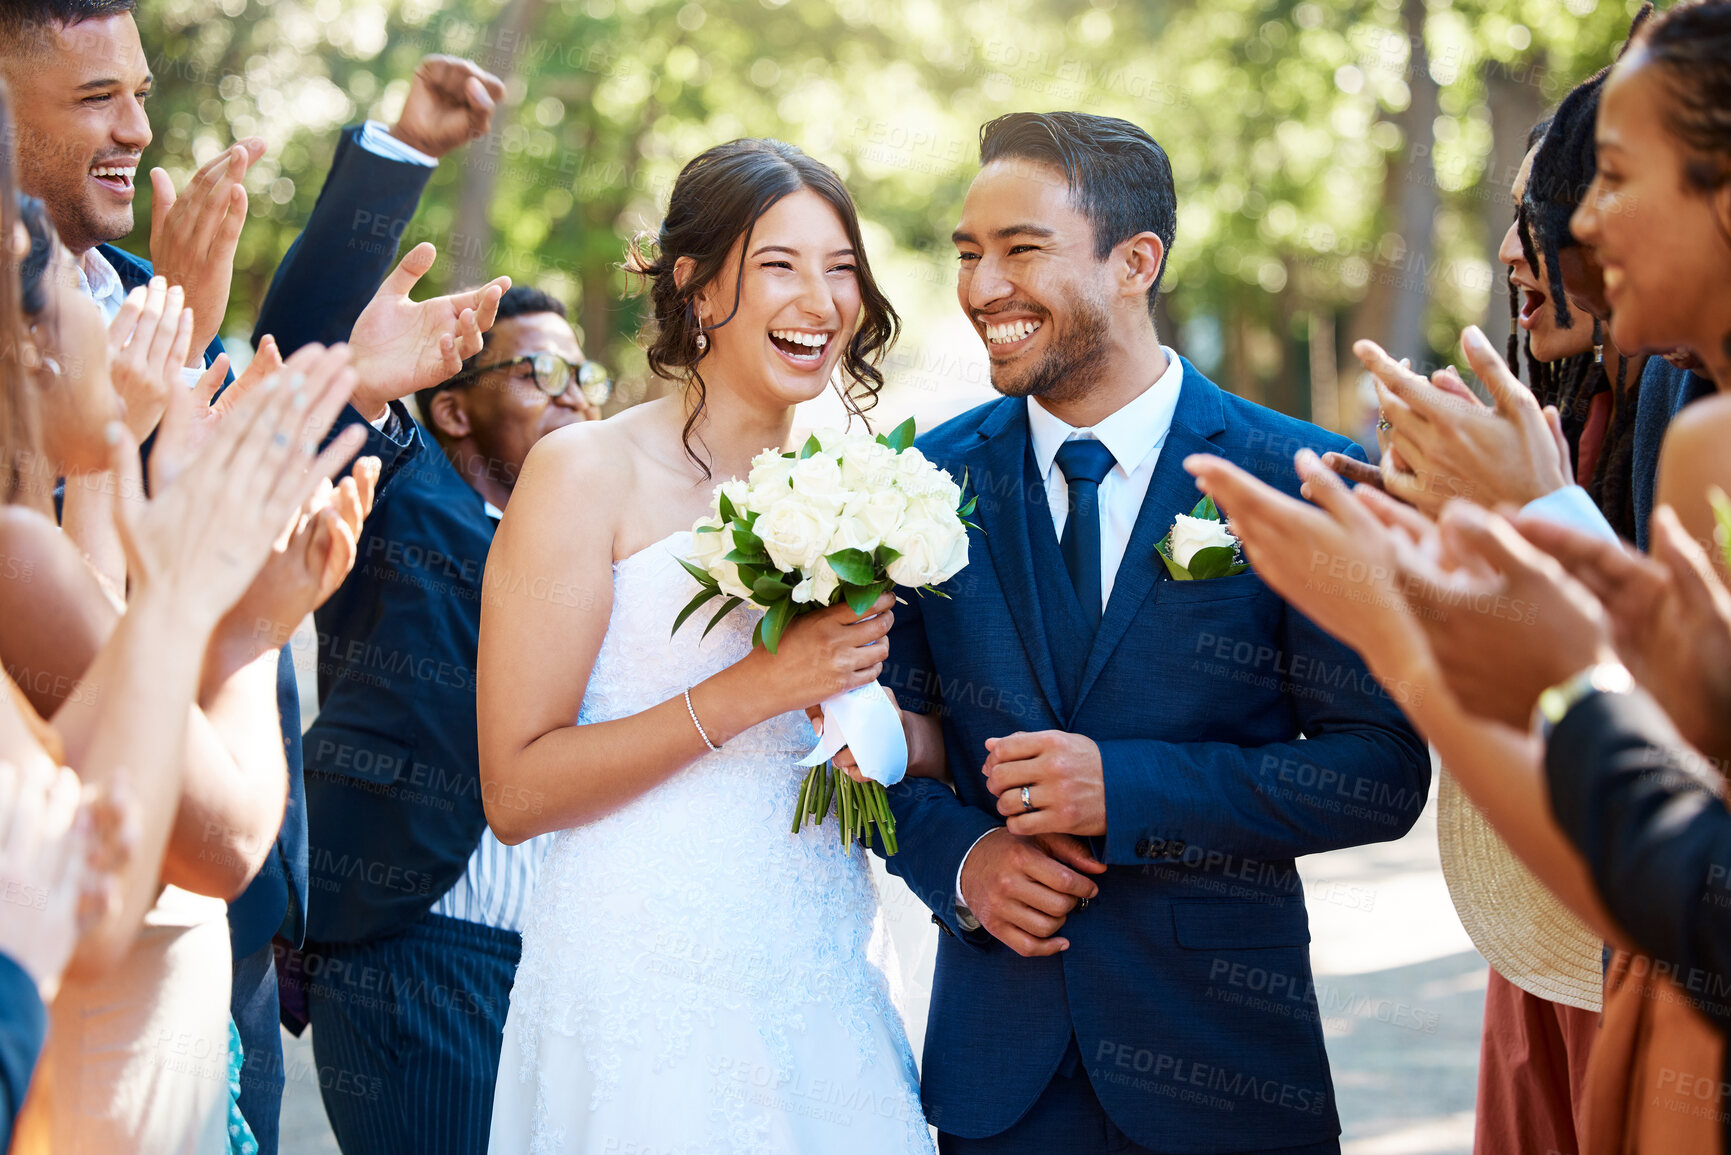 Buy stock photo Couple, wedding and guests clapping hands in celebration of love, romance and union. Happy, smile and young bride with a bouquet and groom walking by crowd cheering for marriage at an outdoor event.